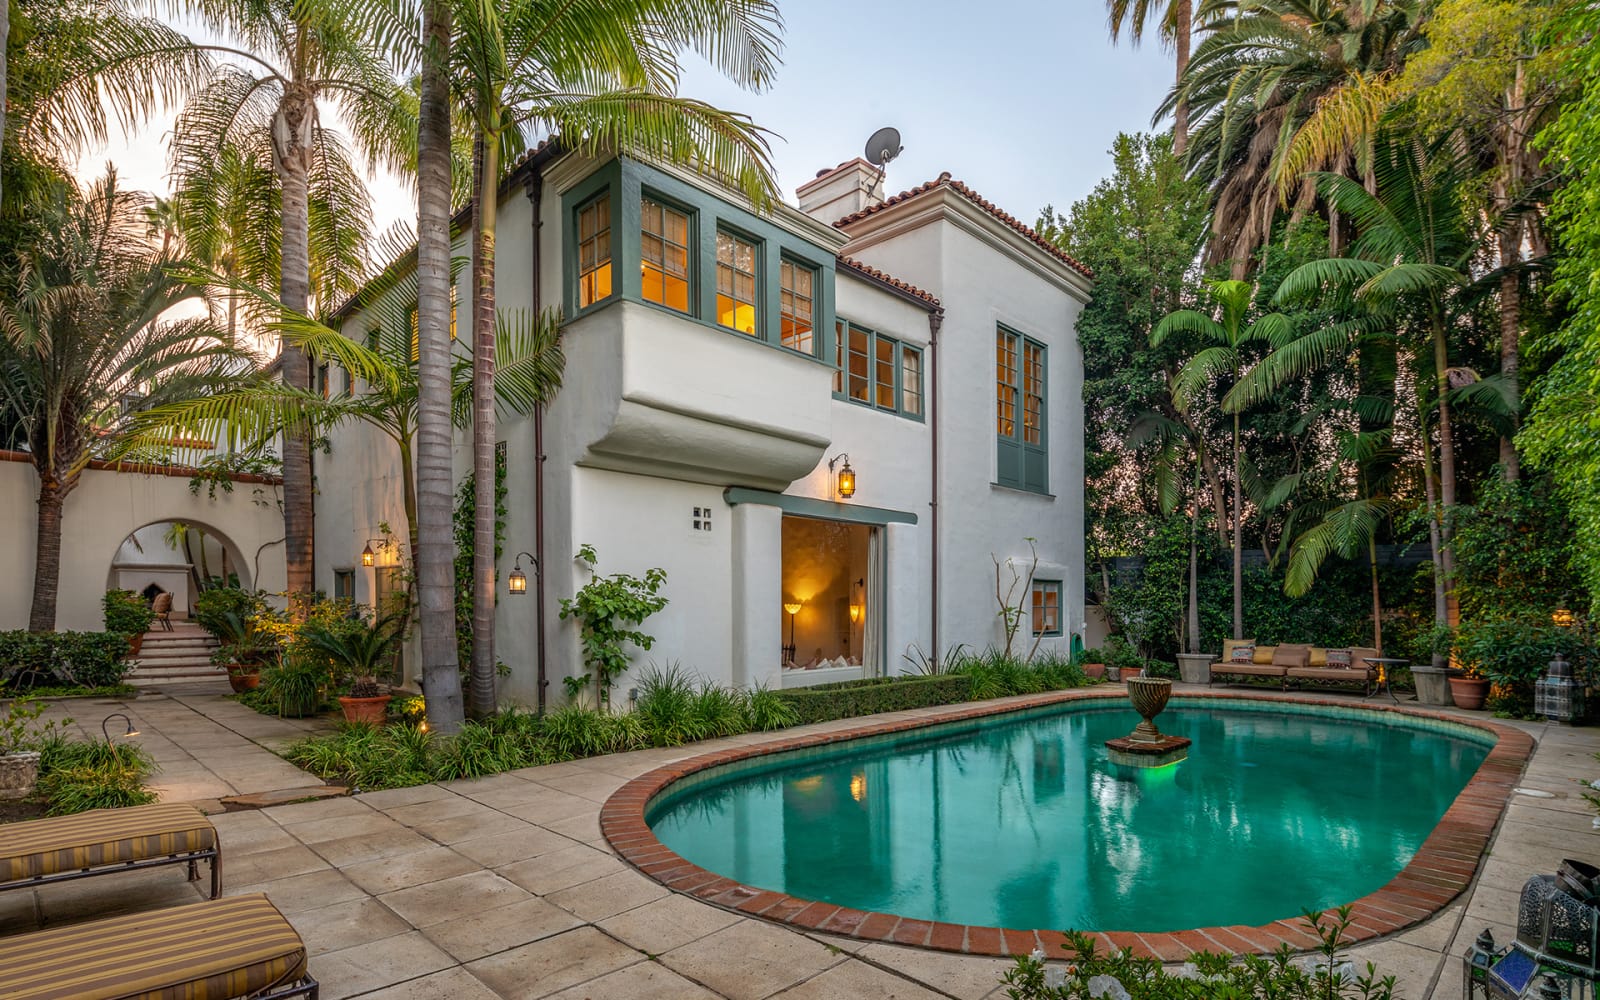 Leonard Rabinowitz and partner, Jack Friedkin, just launched The Chimorro House | 911 North Beverly.